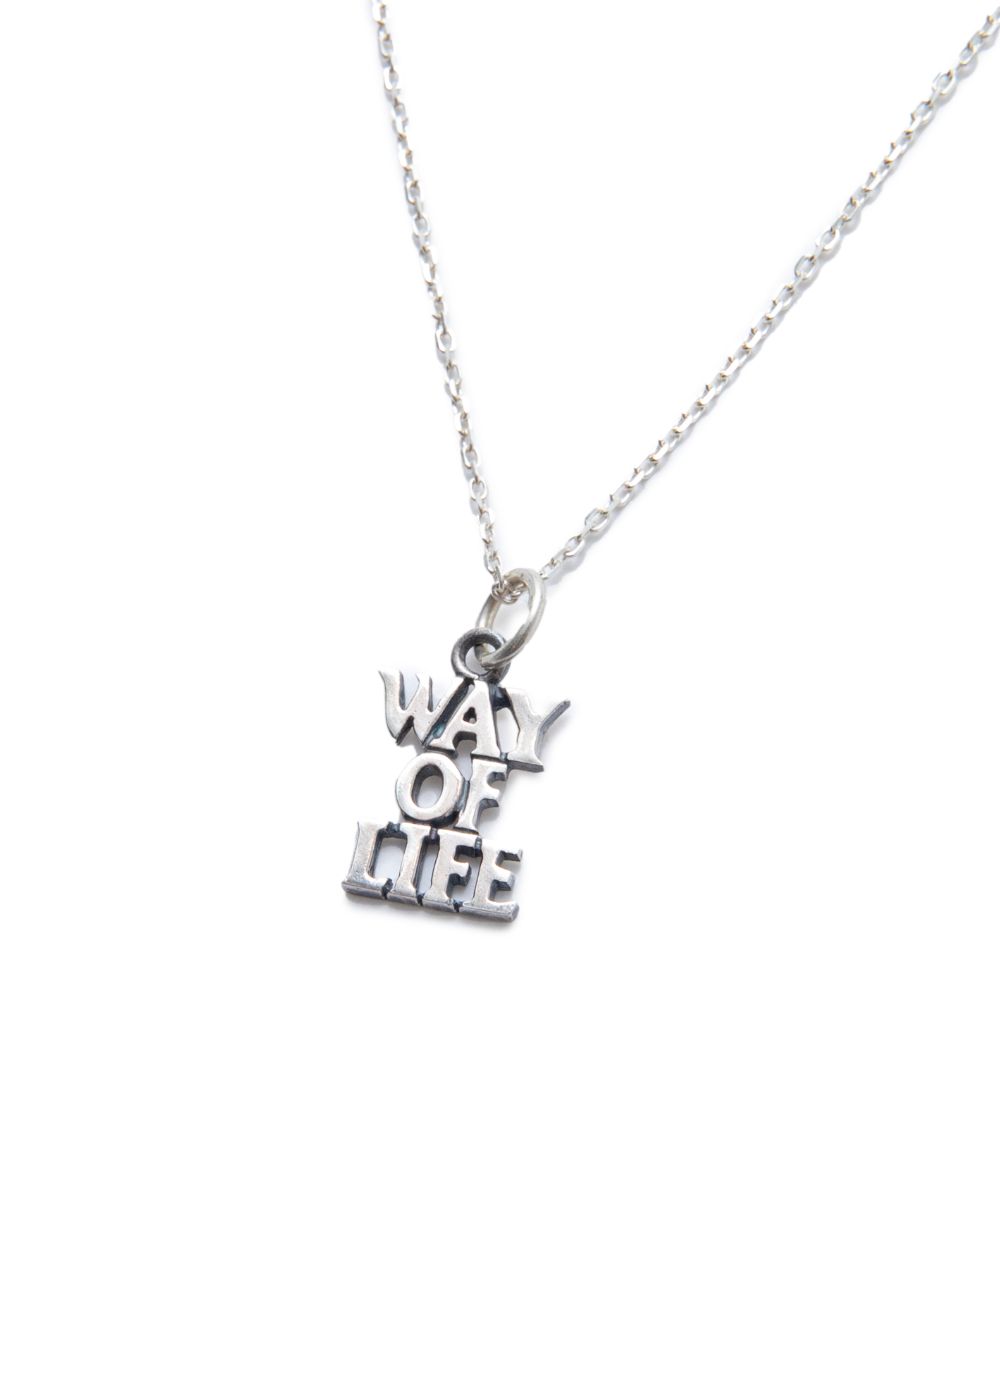 RATS - NECKLACE WAY OF LIFE SILVER (SILVER) / シルバー ネックレス 